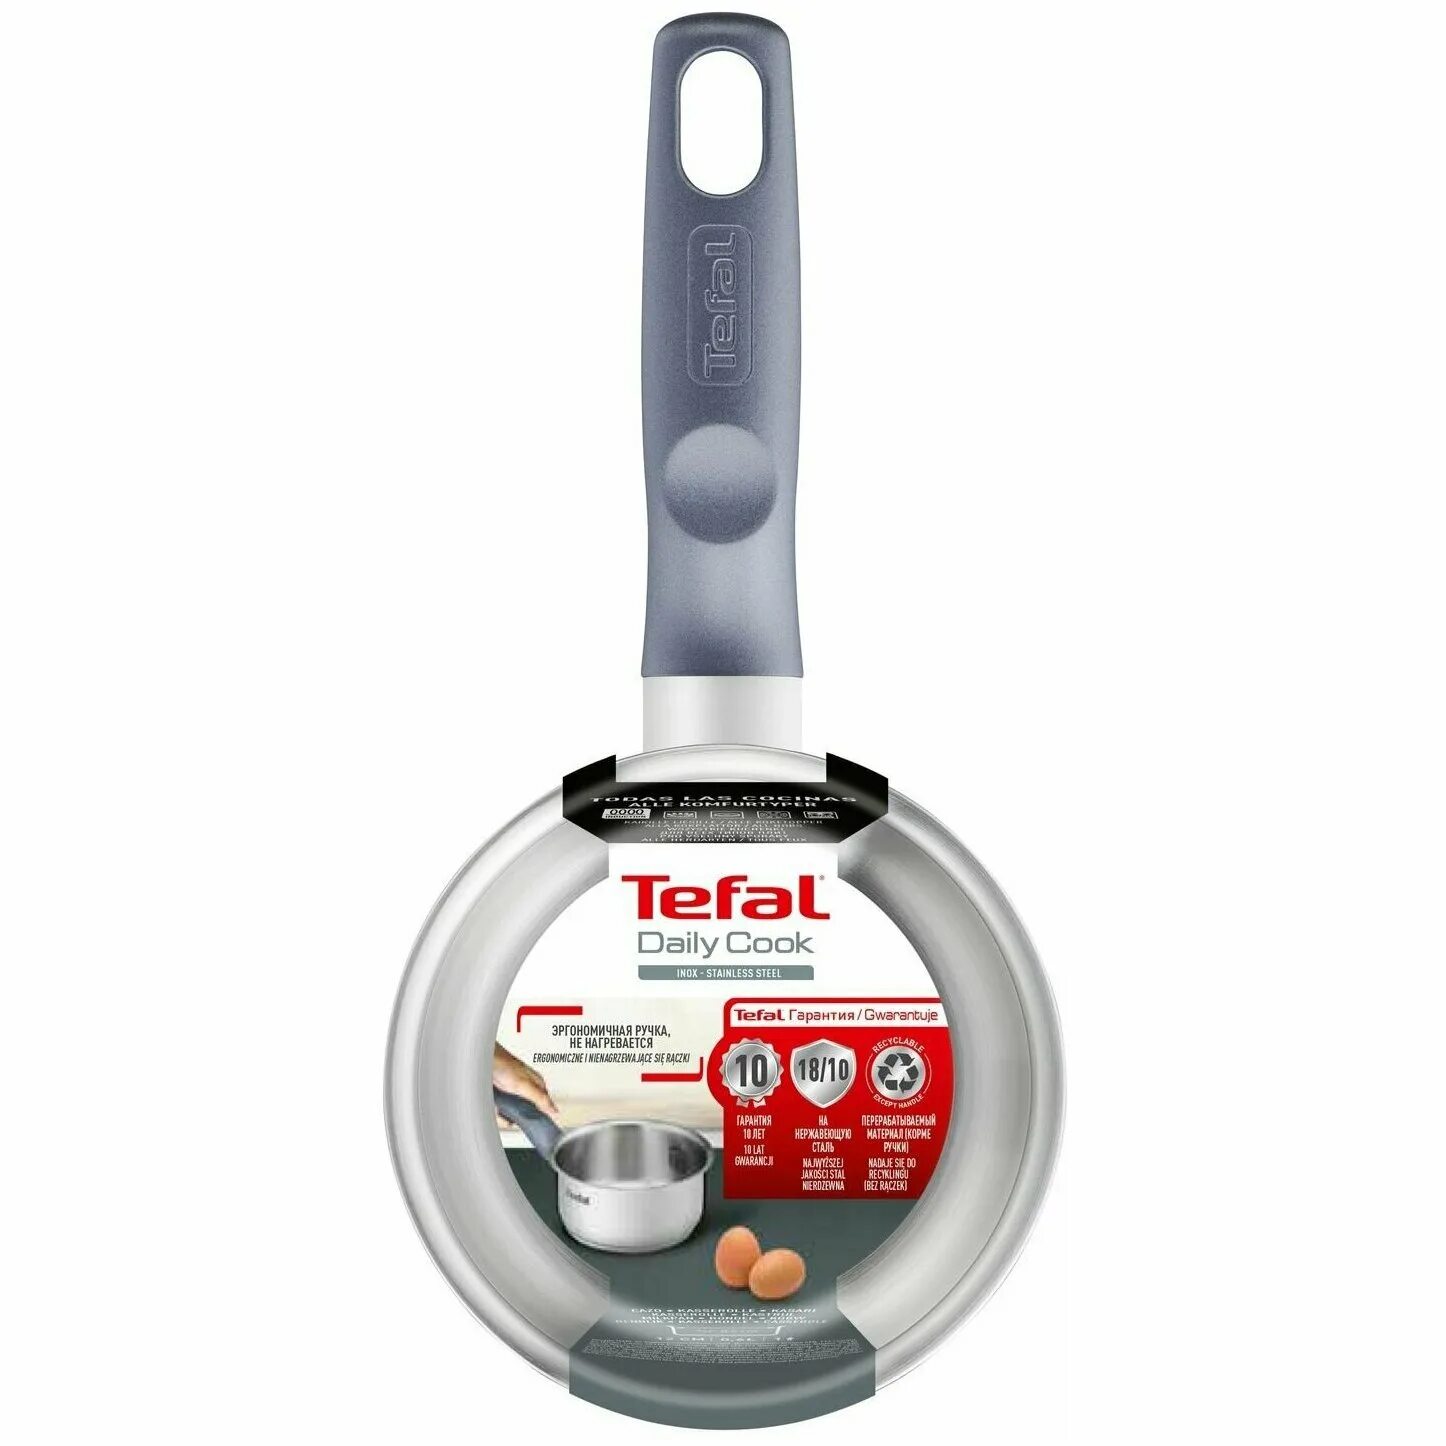 Tefal Daily Cook g7130414.